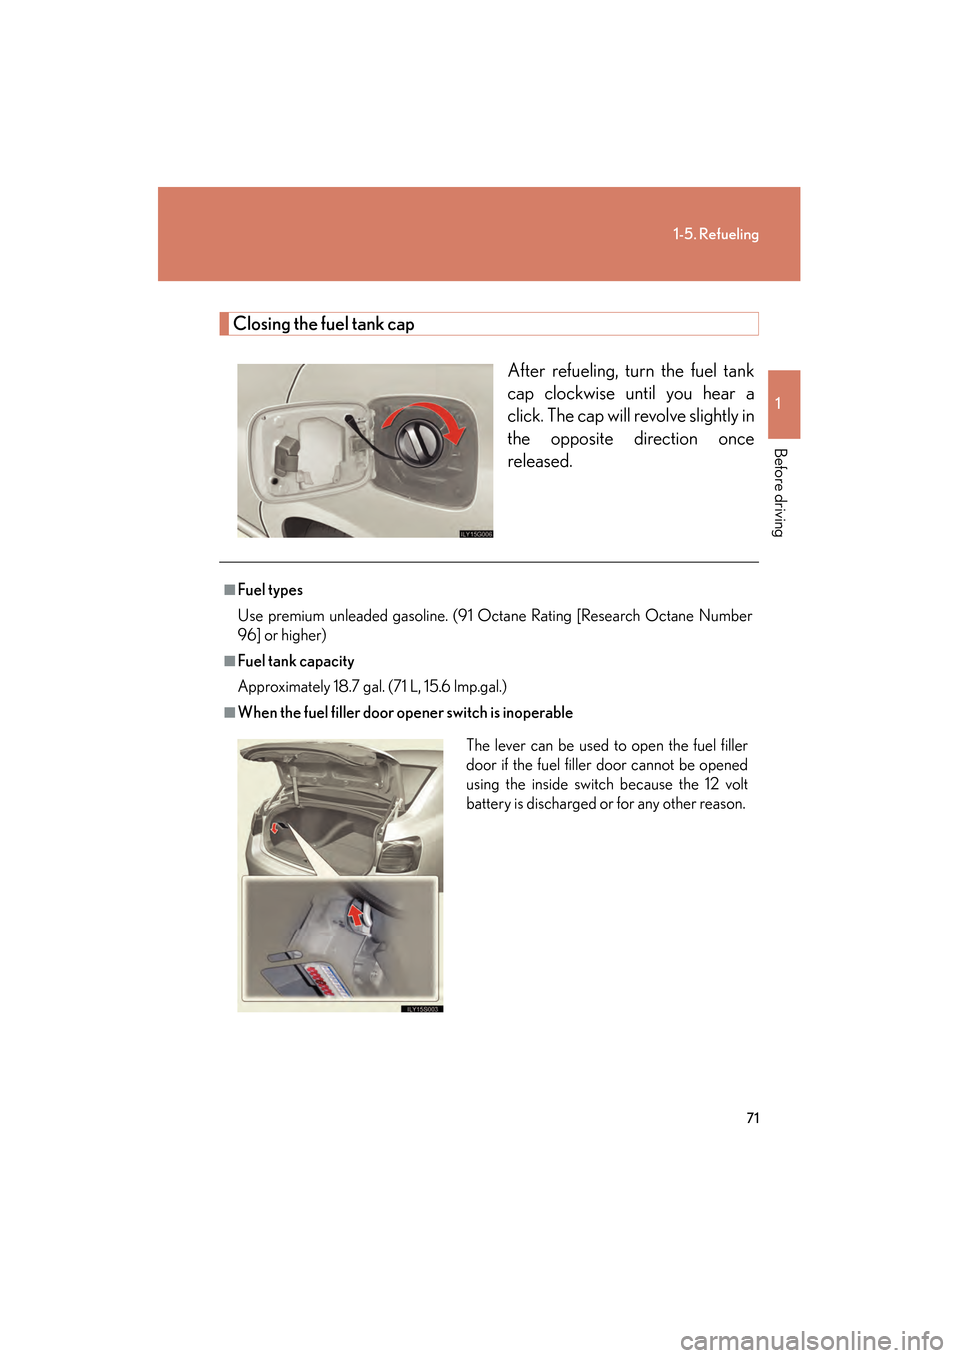 Lexus GS350 2008 Manual PDF 71
1-5. Refueling
1
Before driving
GS_G_U
June 19, 2008 12:54 pm
Closing the fuel tank capAfter refueling, turn the fuel tank
cap clockwise until you hear a
click. The cap will revolve slightly in
the